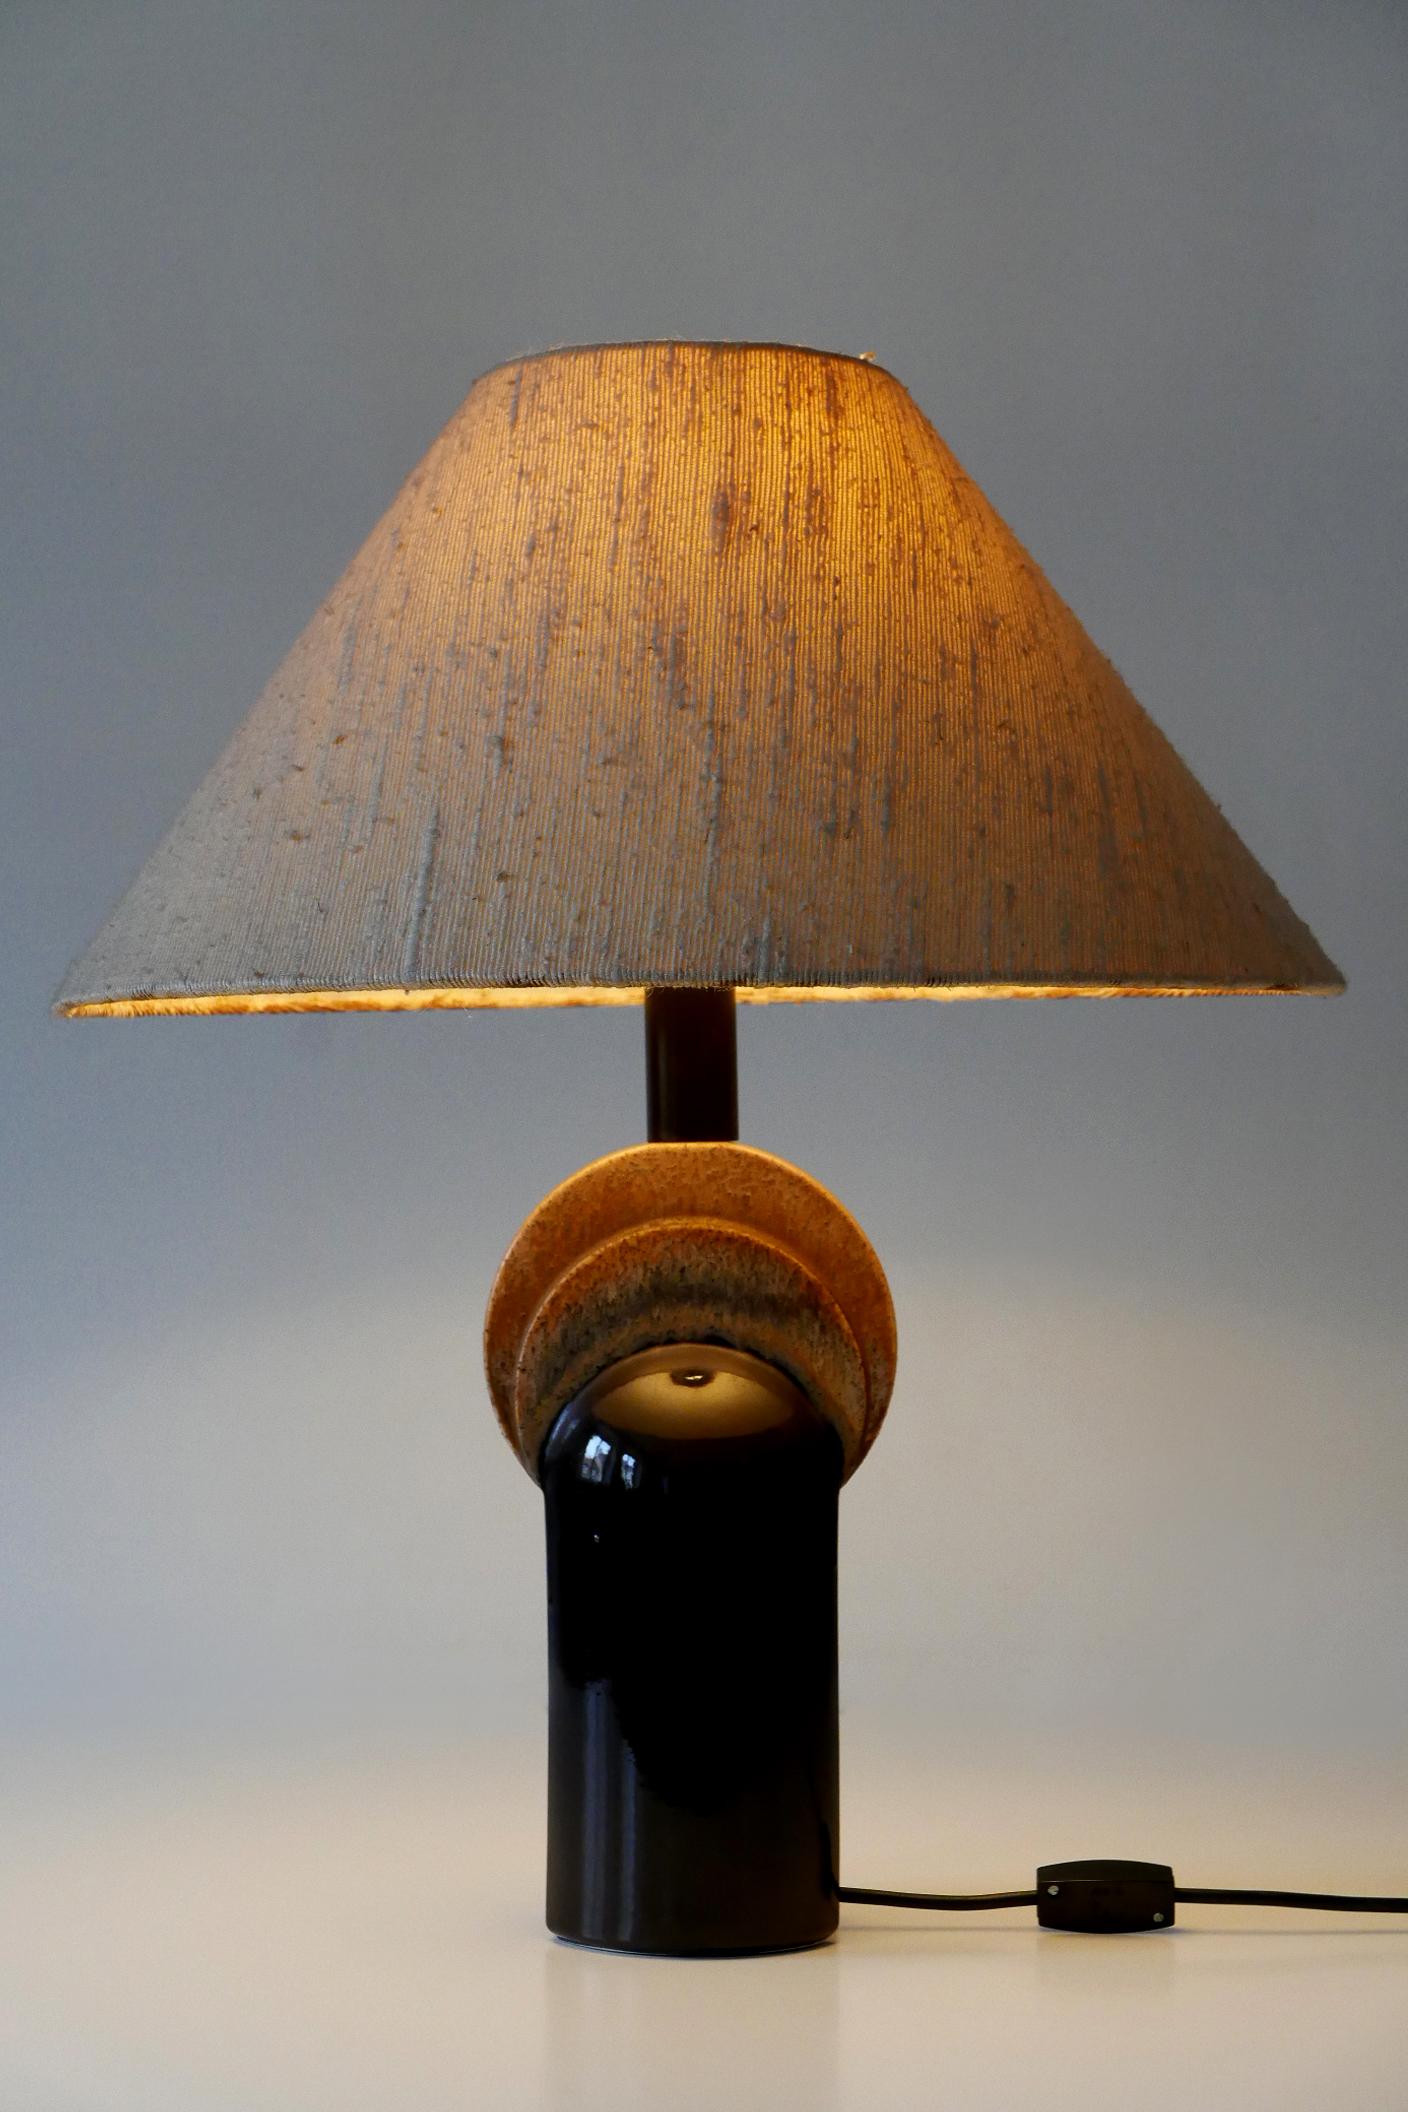 Extremely rare and elegant Mid-Century Modern ceramic table lamp. Designed & manufactured by Leola Design, Germany, 1960s. Makers label on the base.

Executed in ceramic and fabric, the table lamp comes with 1 x E27 / E26 Edison screw fit bulb